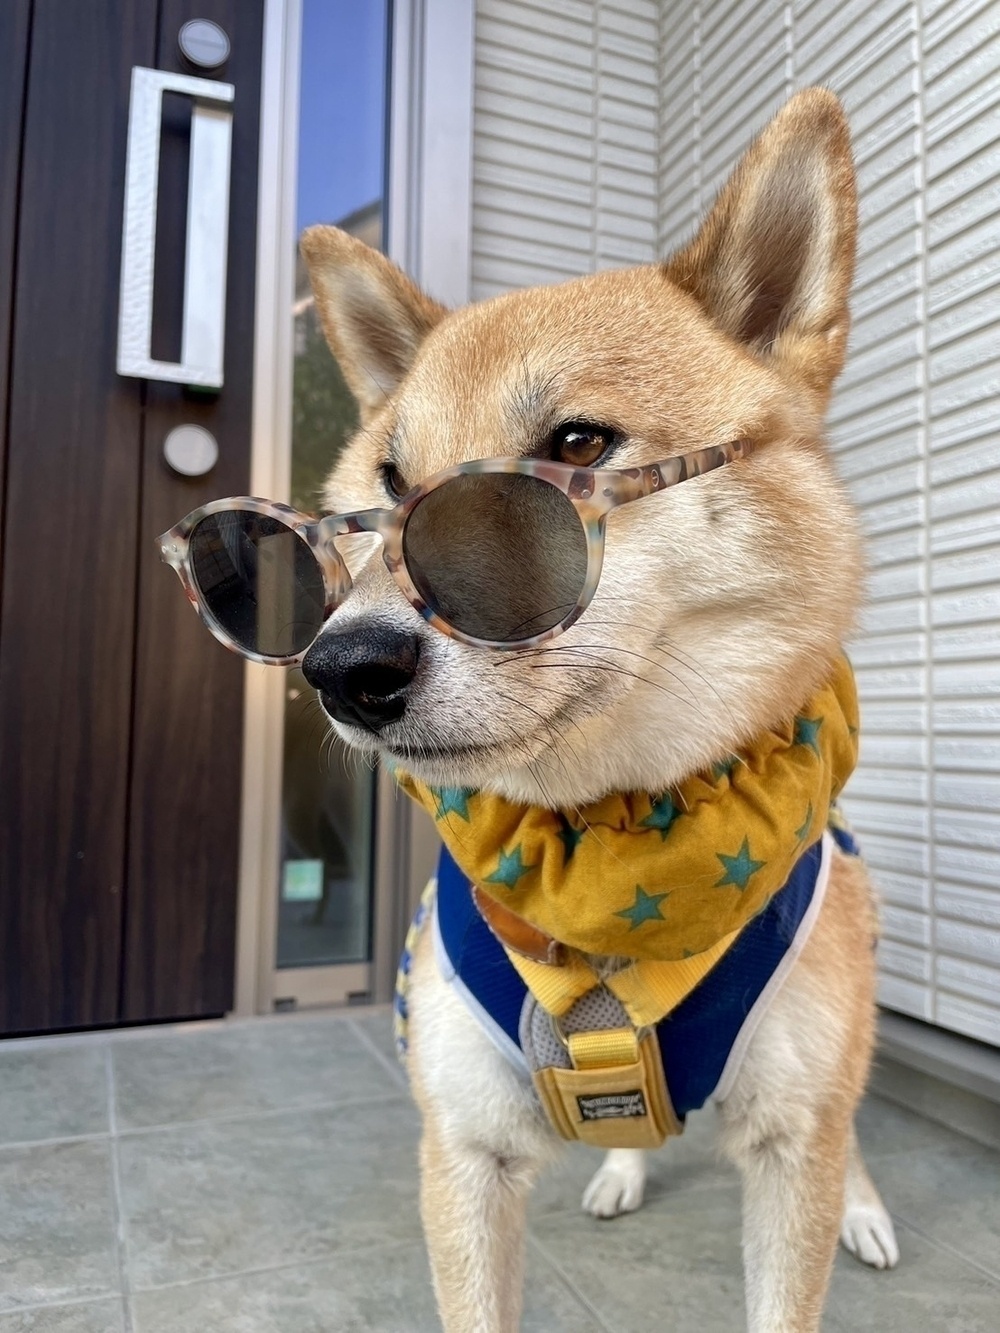 A dog wearing sunglasses and a yellow scarf with green stars stands in front of a door.